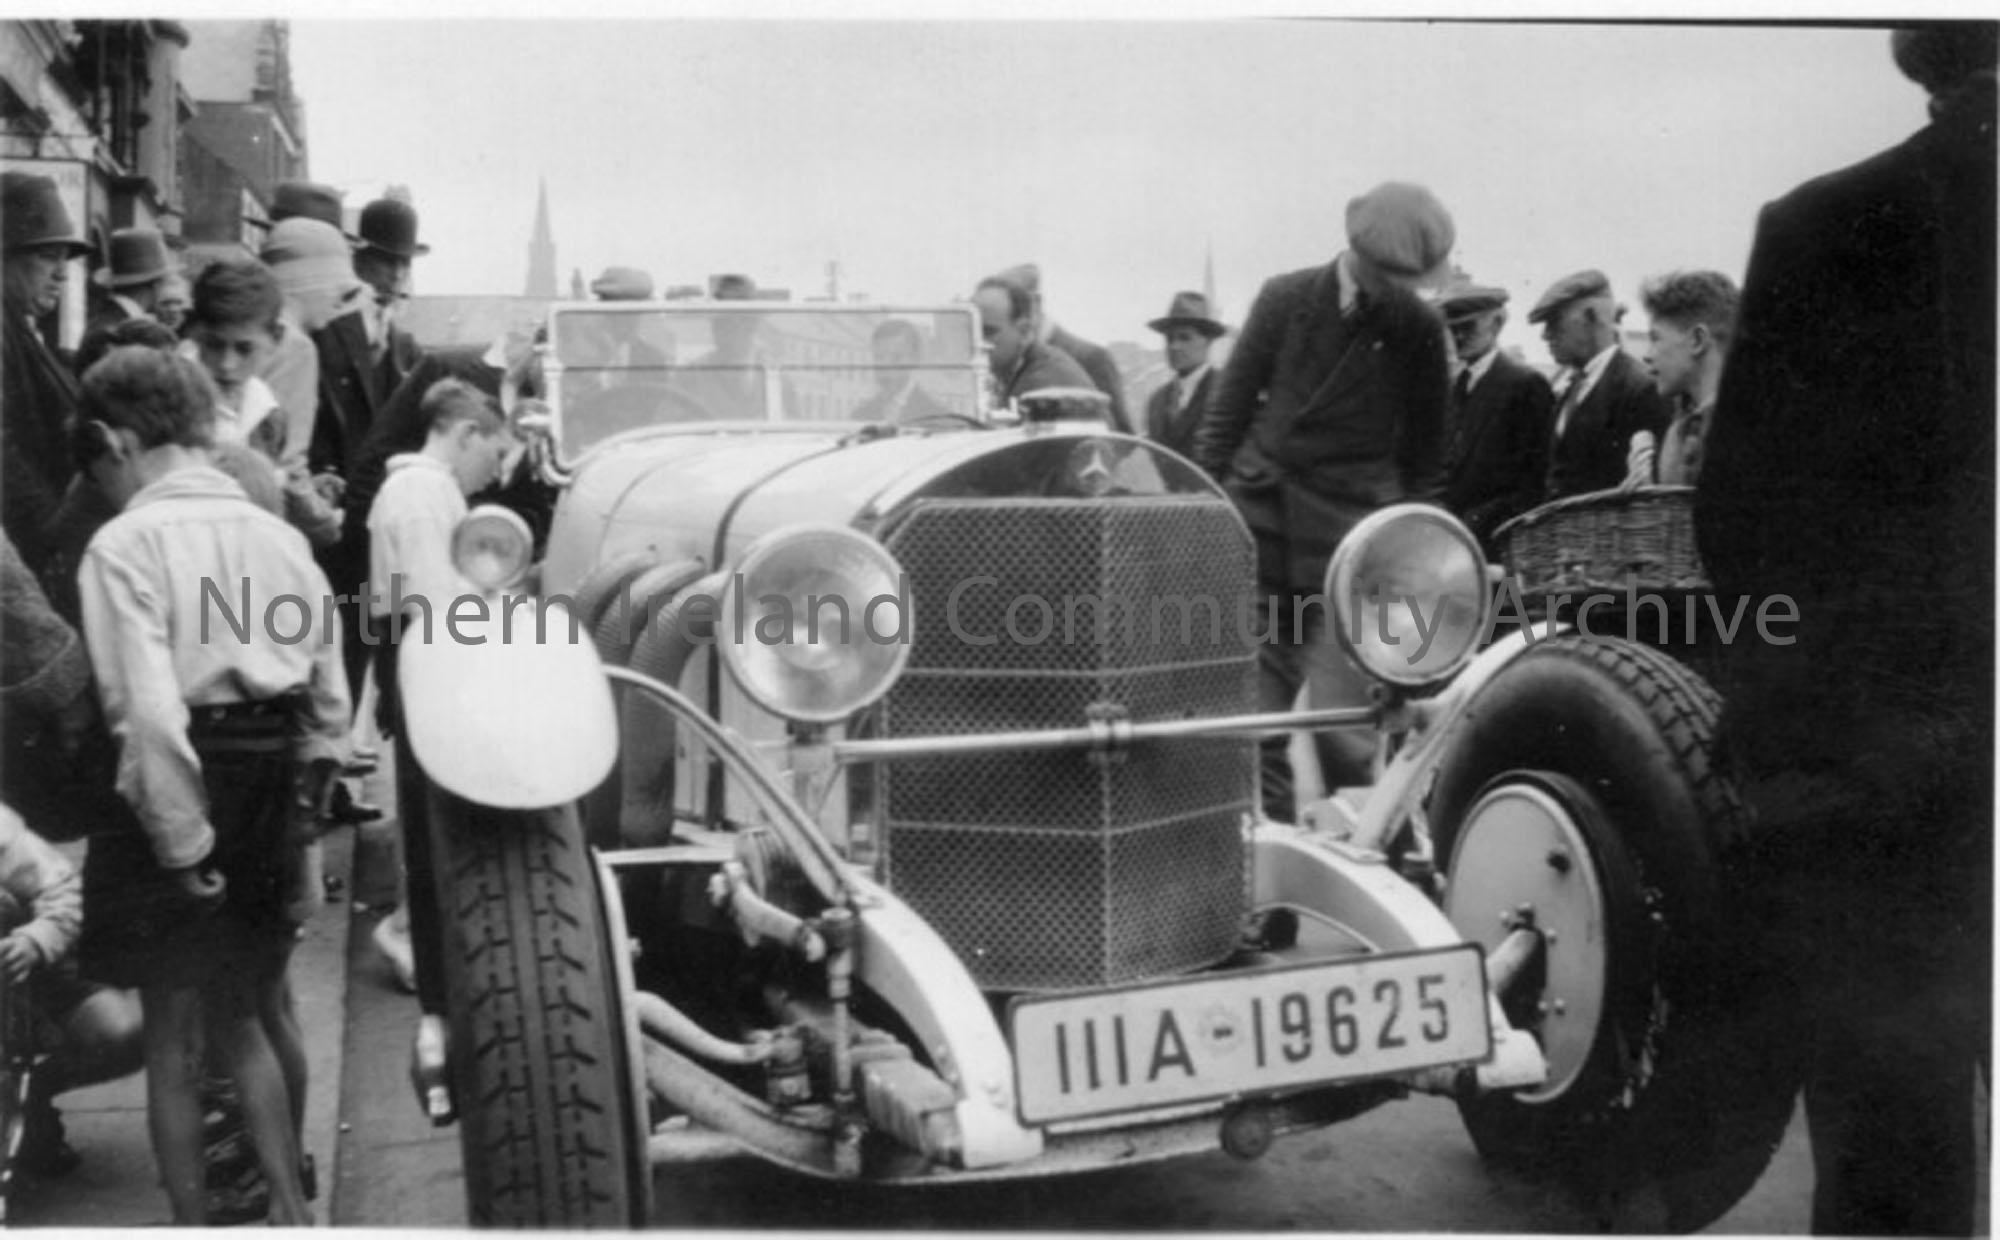 Crowds gather around a car belonging to Austin Prince, which raced in the Ulster TT. No. Plate, IIIA 19625